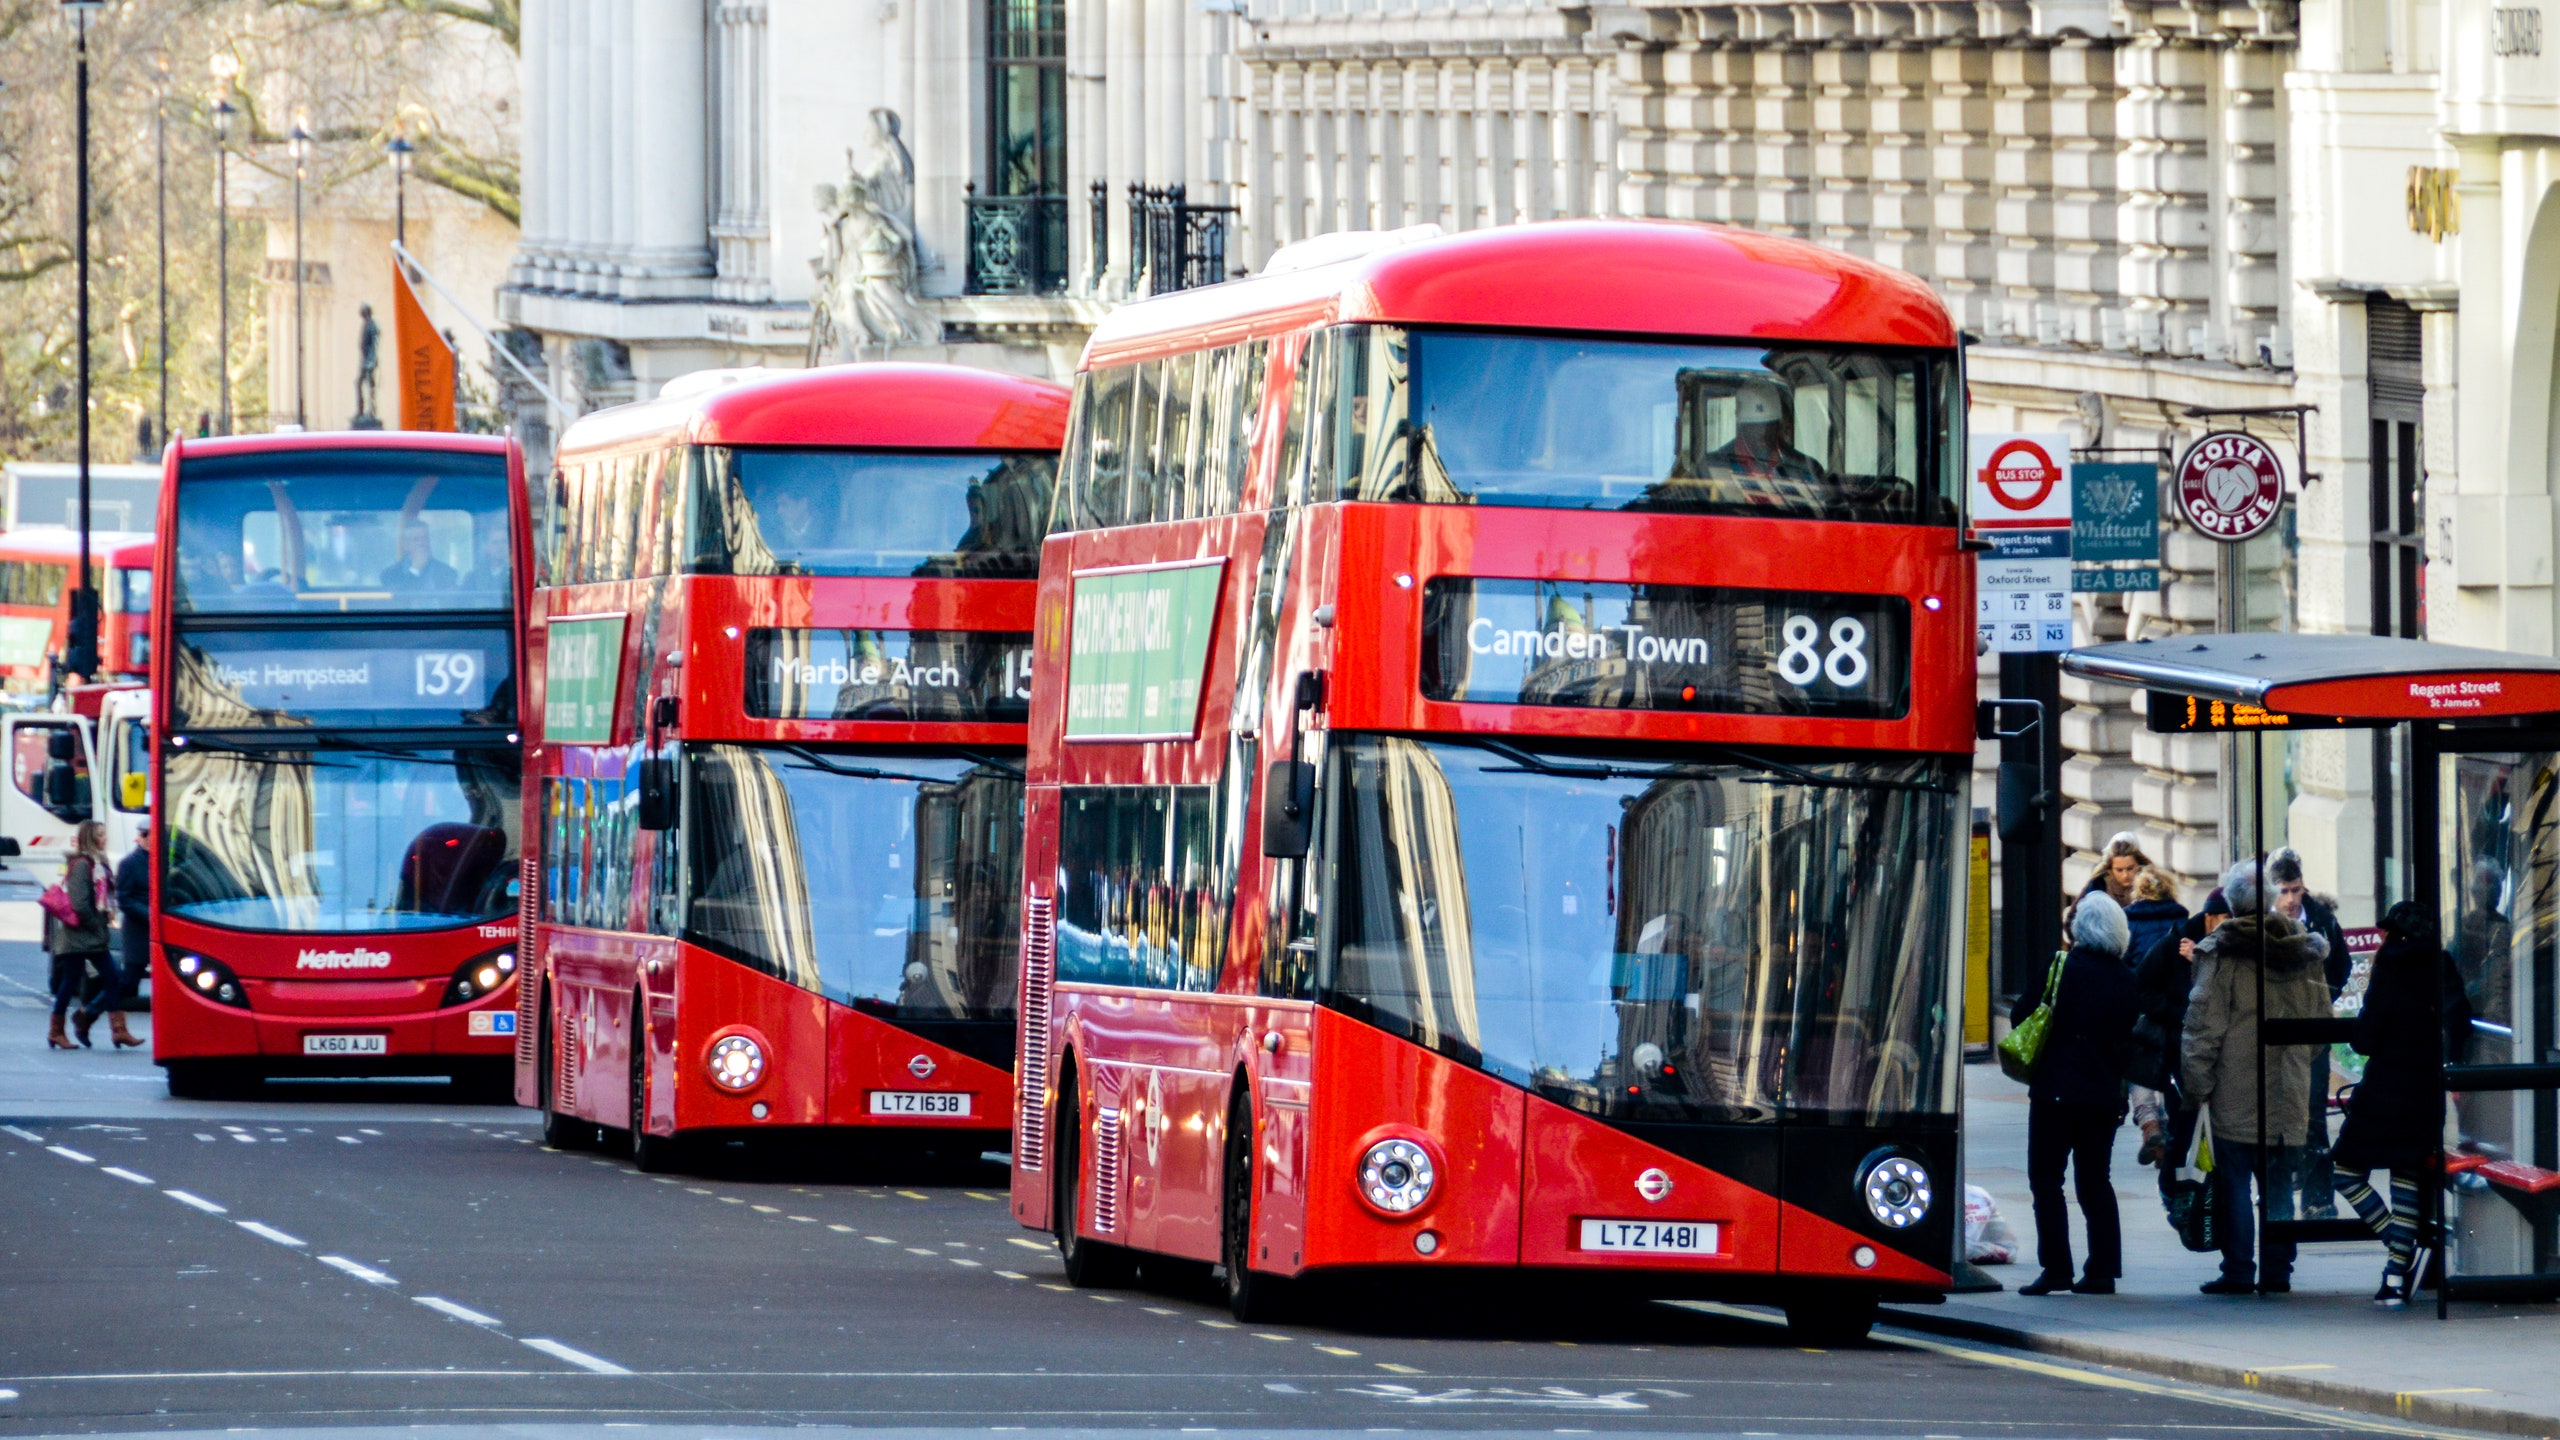 London Buses Are Now Powered by Coffee. Condé Nast Traveler